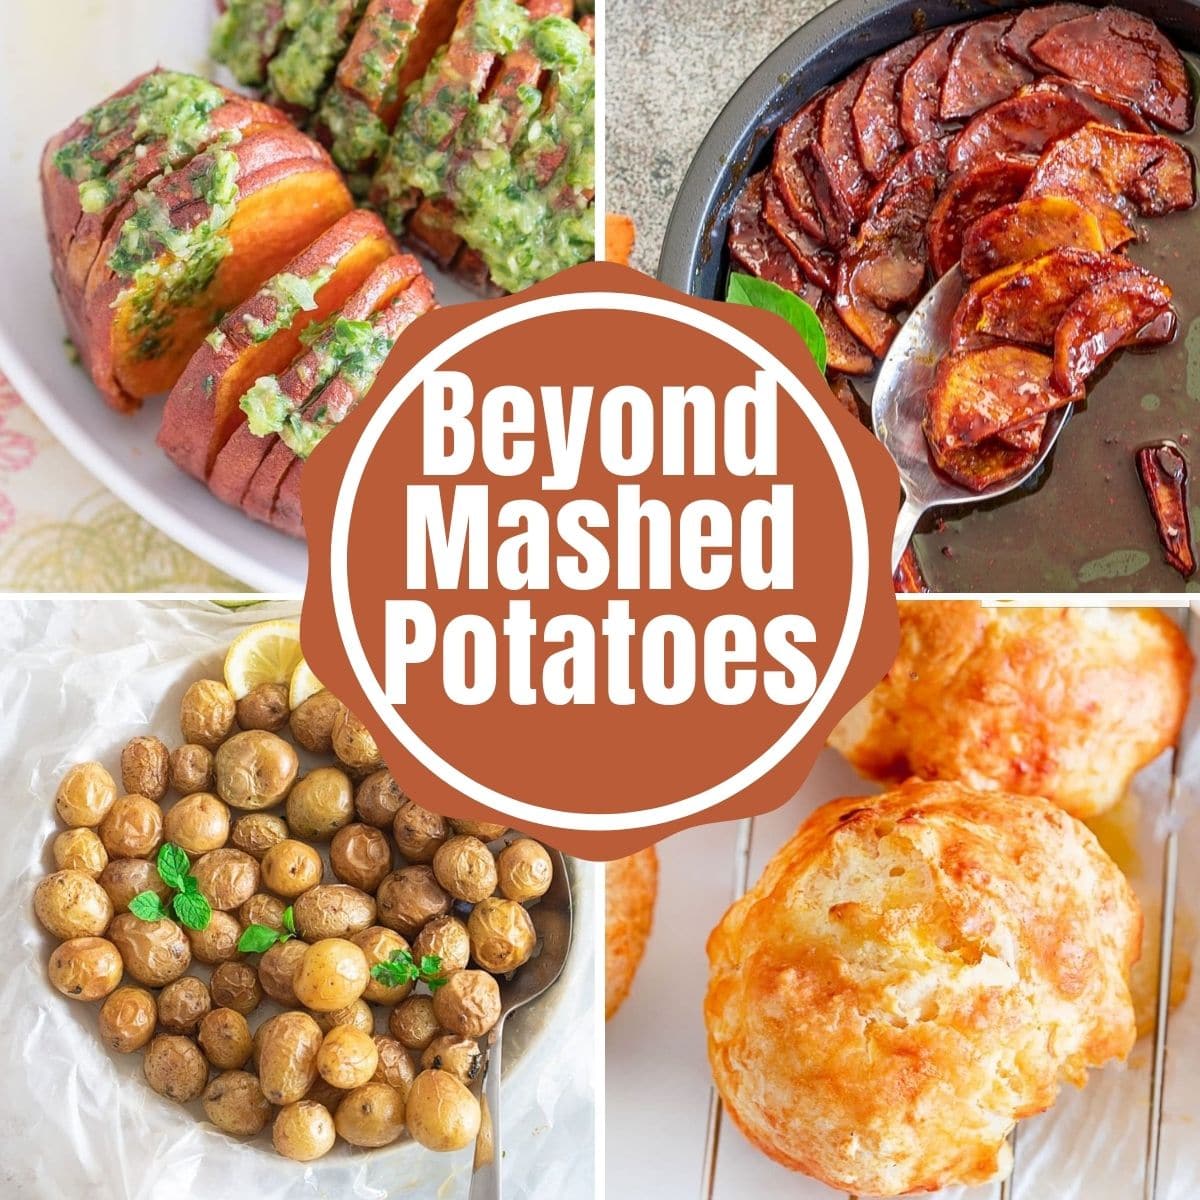 Collage of 4 images and the title of "Beyond Mashed Potatoes"